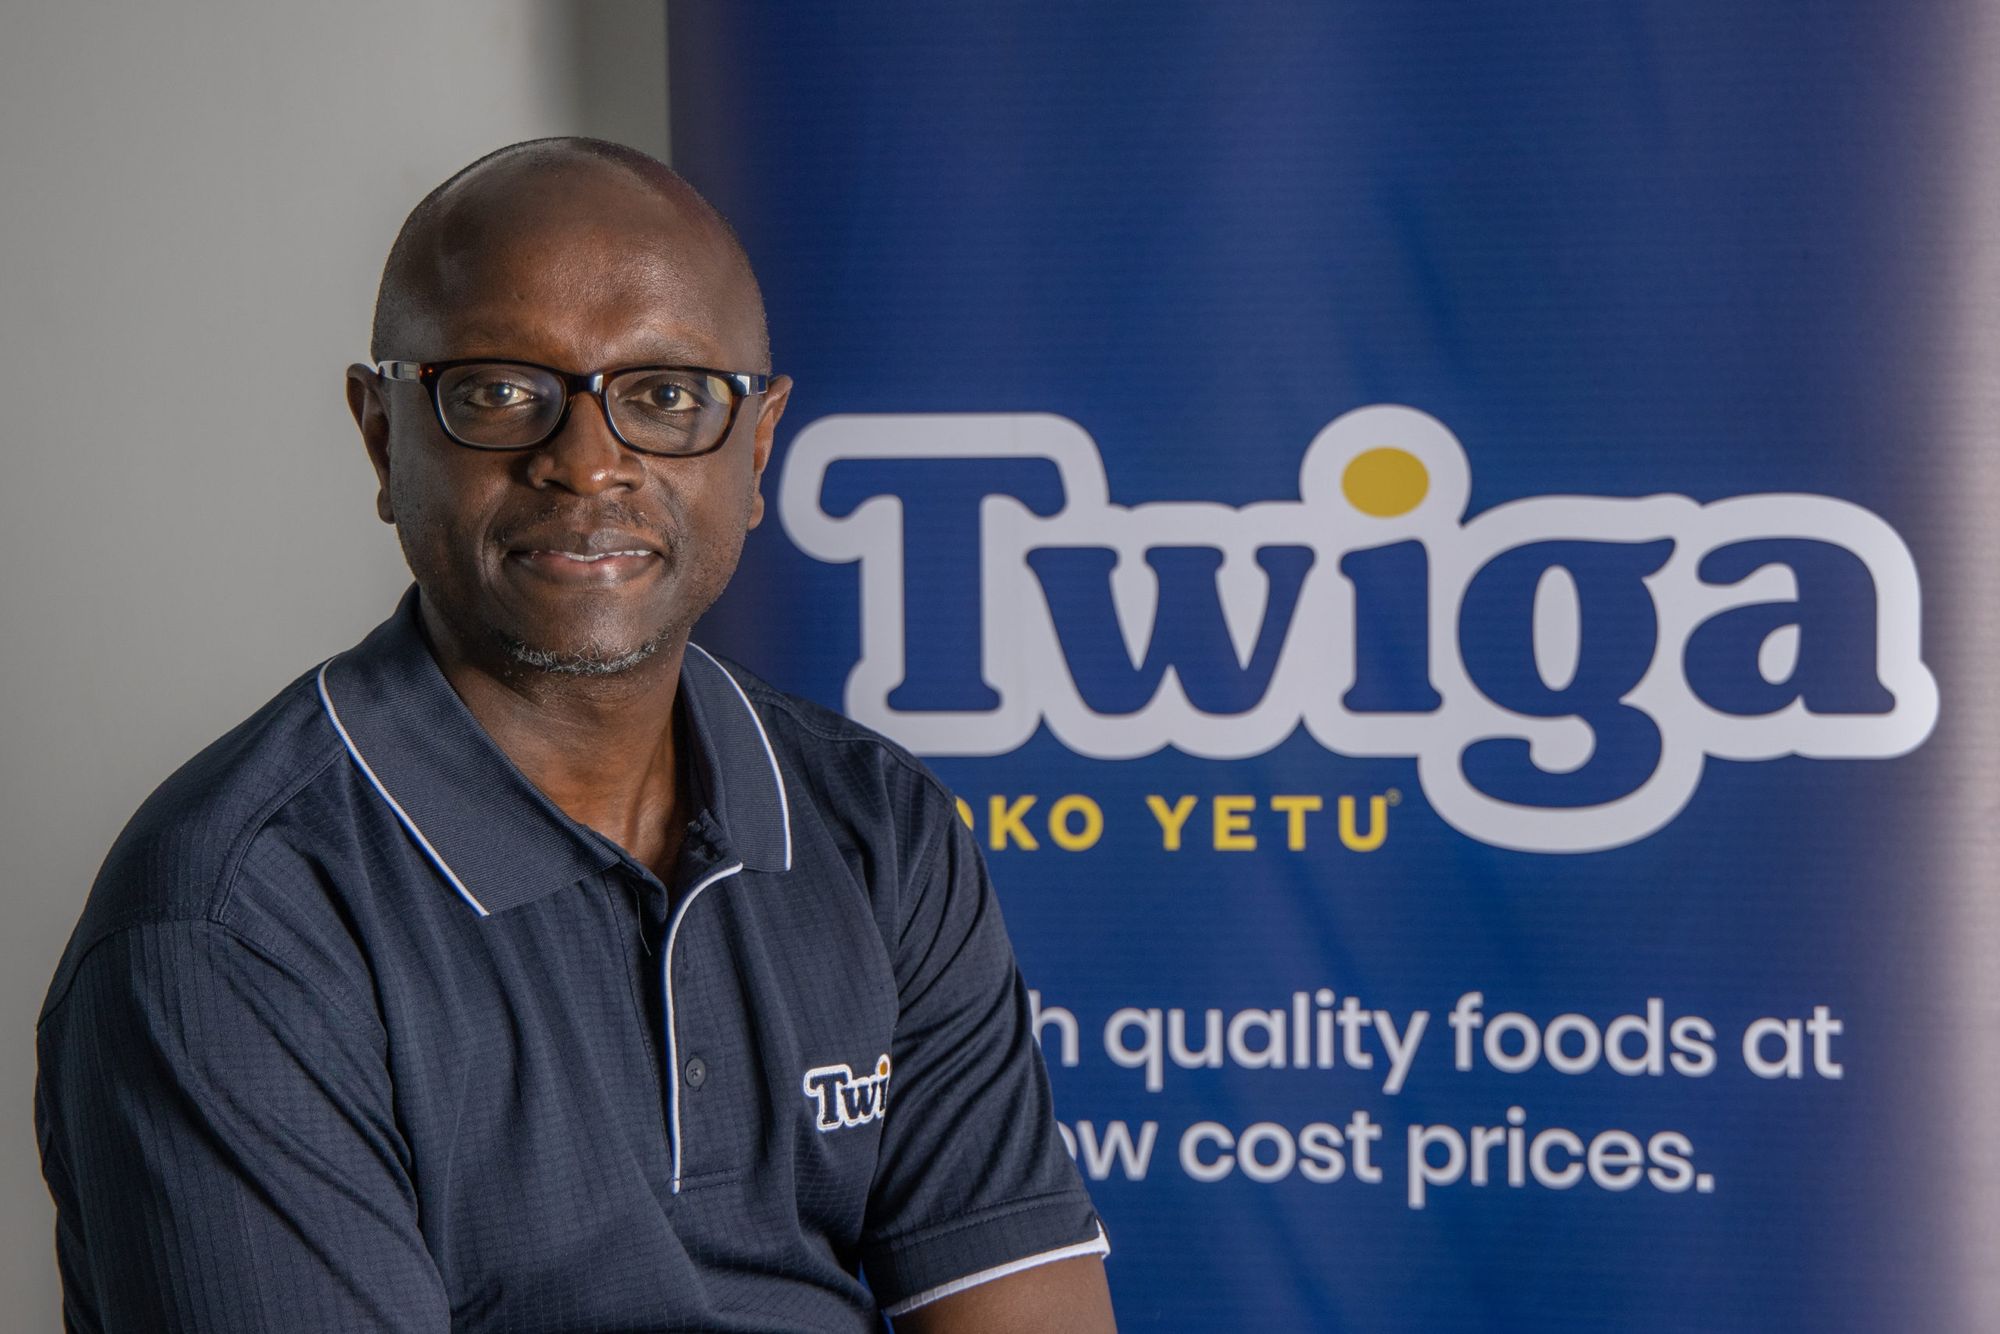 Sabbatical Or Resignation: Twiga CEO’s Peter Njonjo's Departure Sparks Speculations